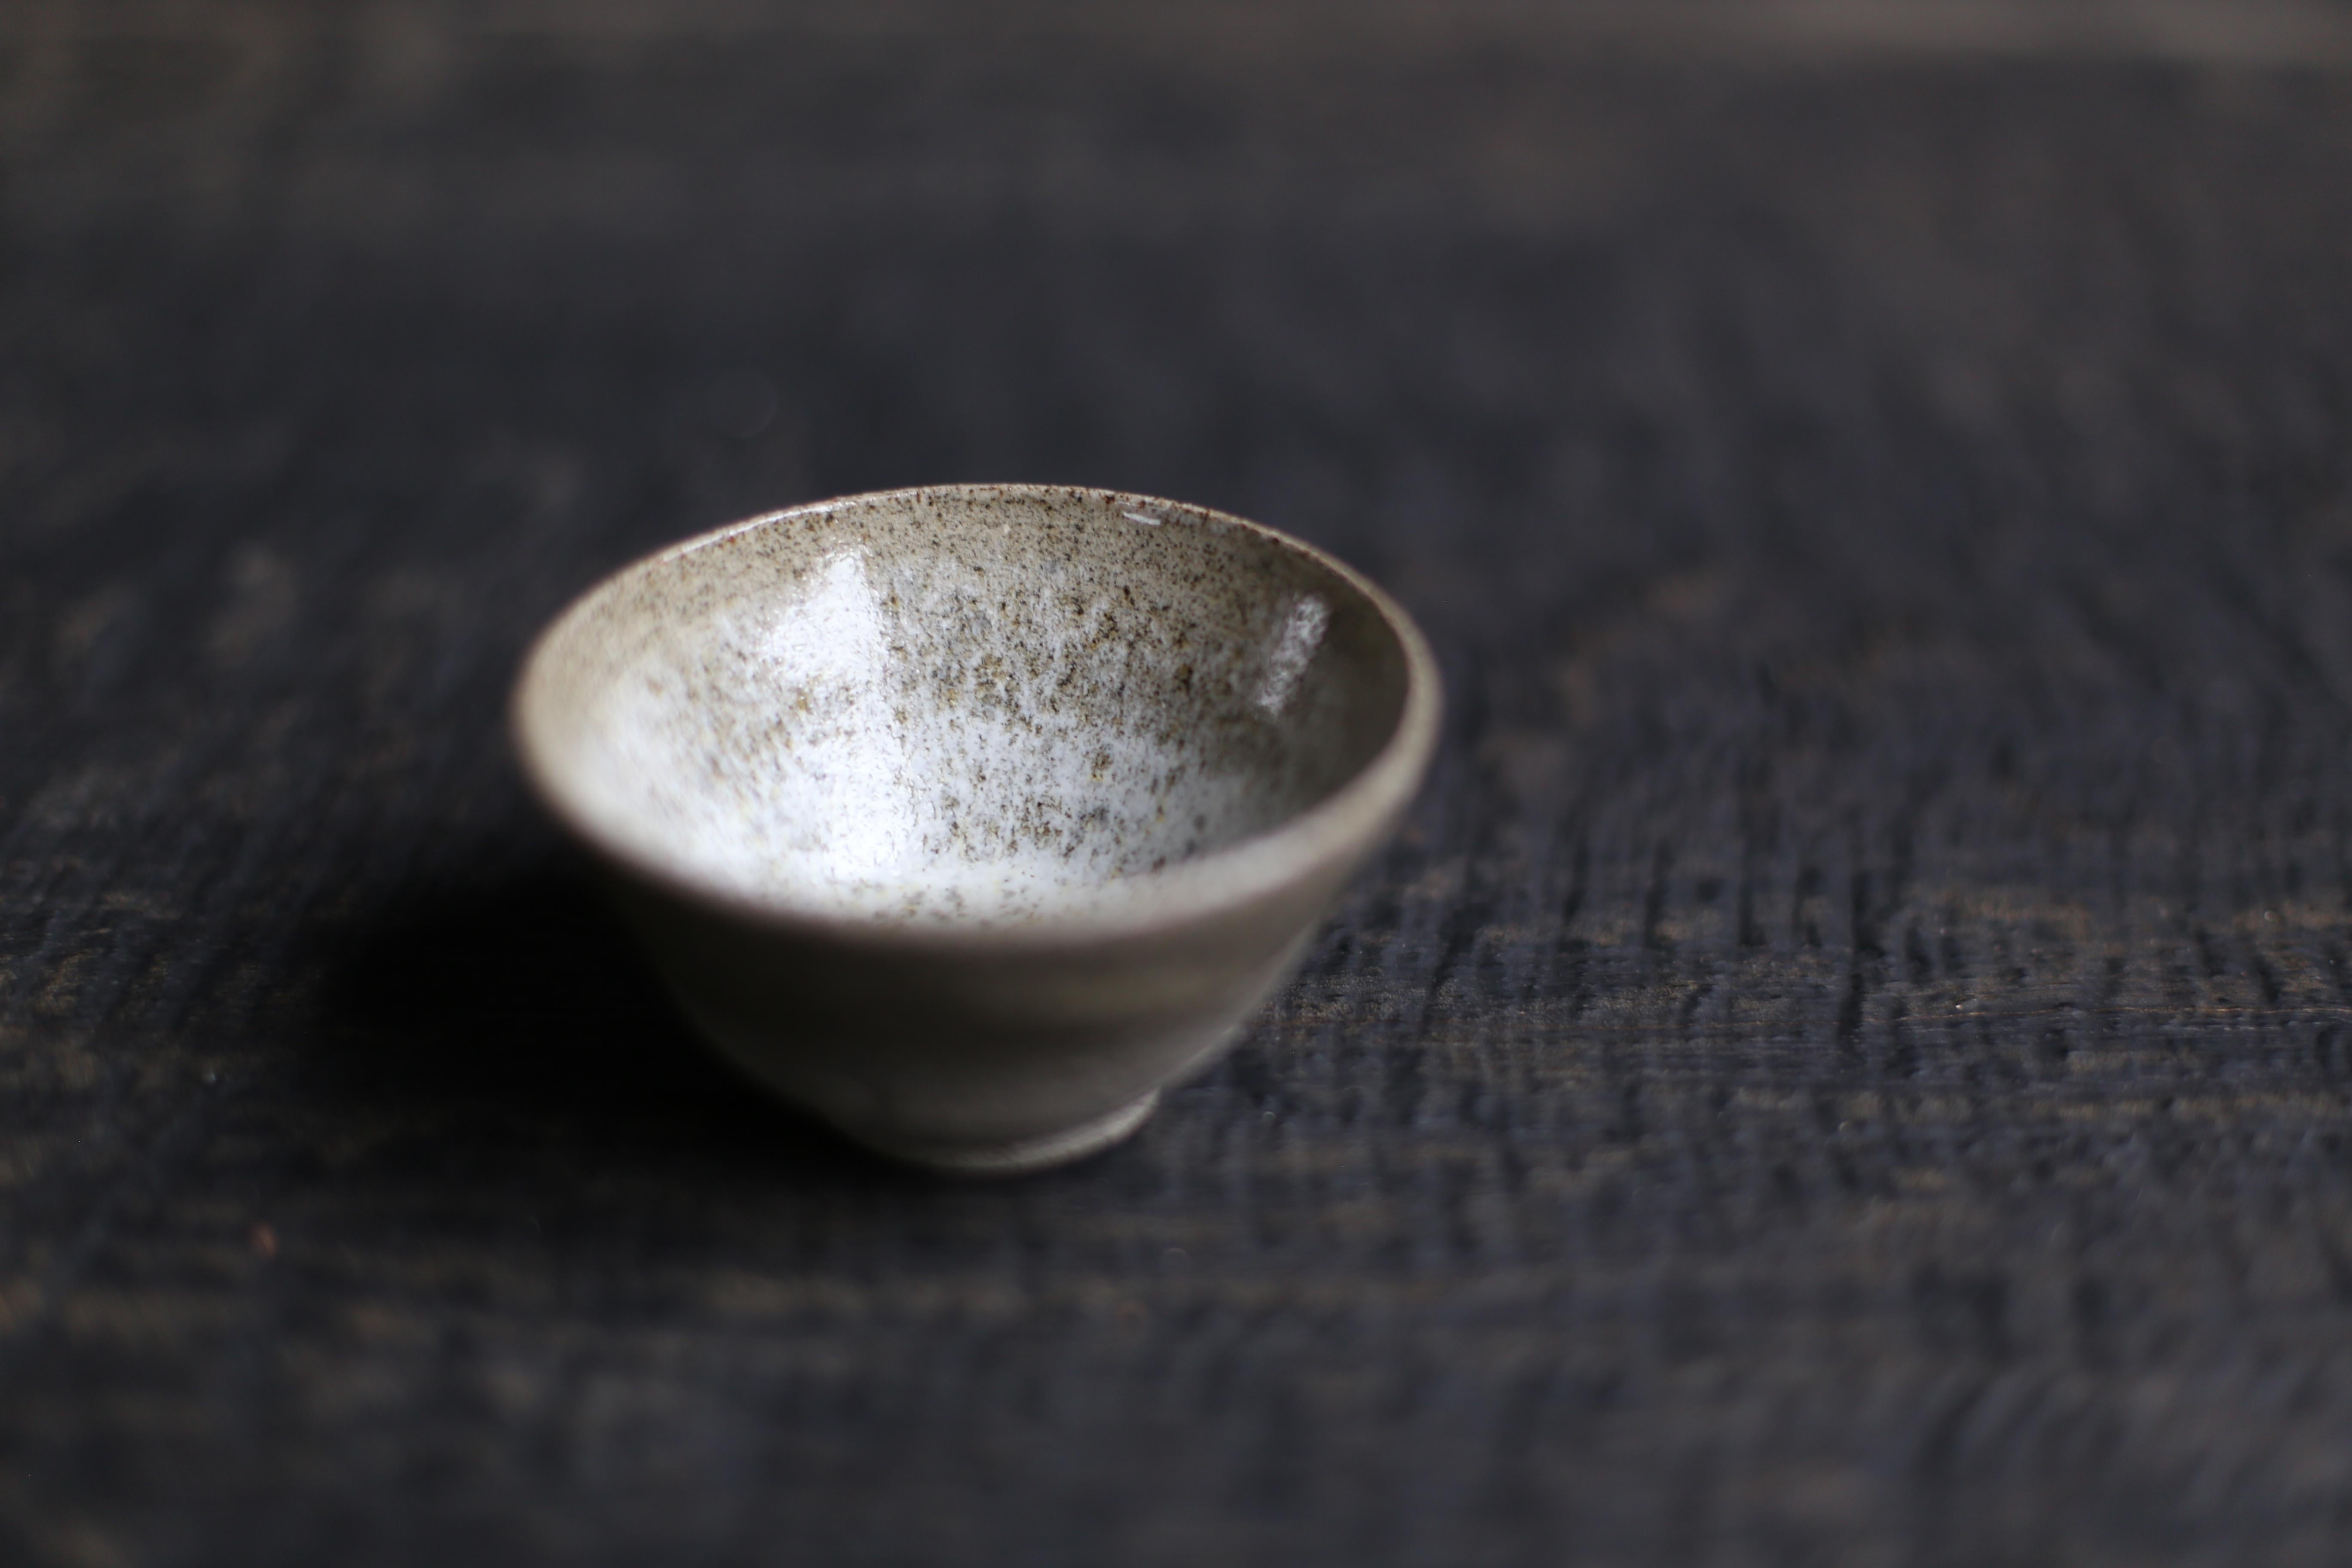 Cup in grey speckled clay with white speckled glaze (has a meandering line carving) 
2022s / Belgium
Size : f85 h50 mm
Artist : Sigrid Volders


[Sigrid Volders]
Based in Antwerp, Belgium, she works vigorously as a ceramic artist, mainly as a